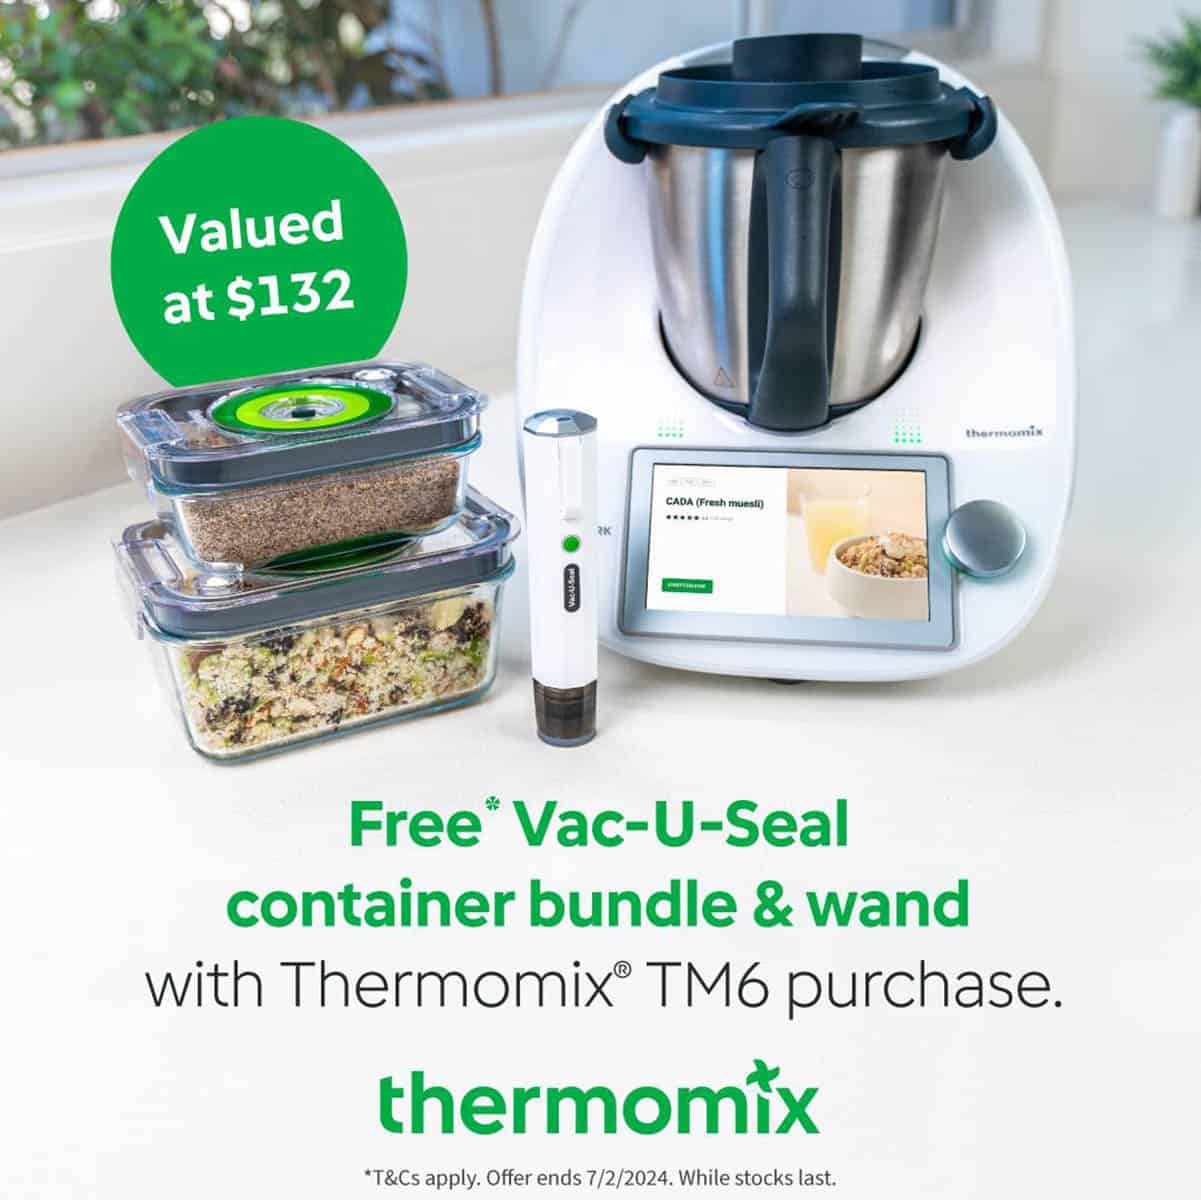 TM6 Free gift with purchase offer shown on a white background with the Thermomix.